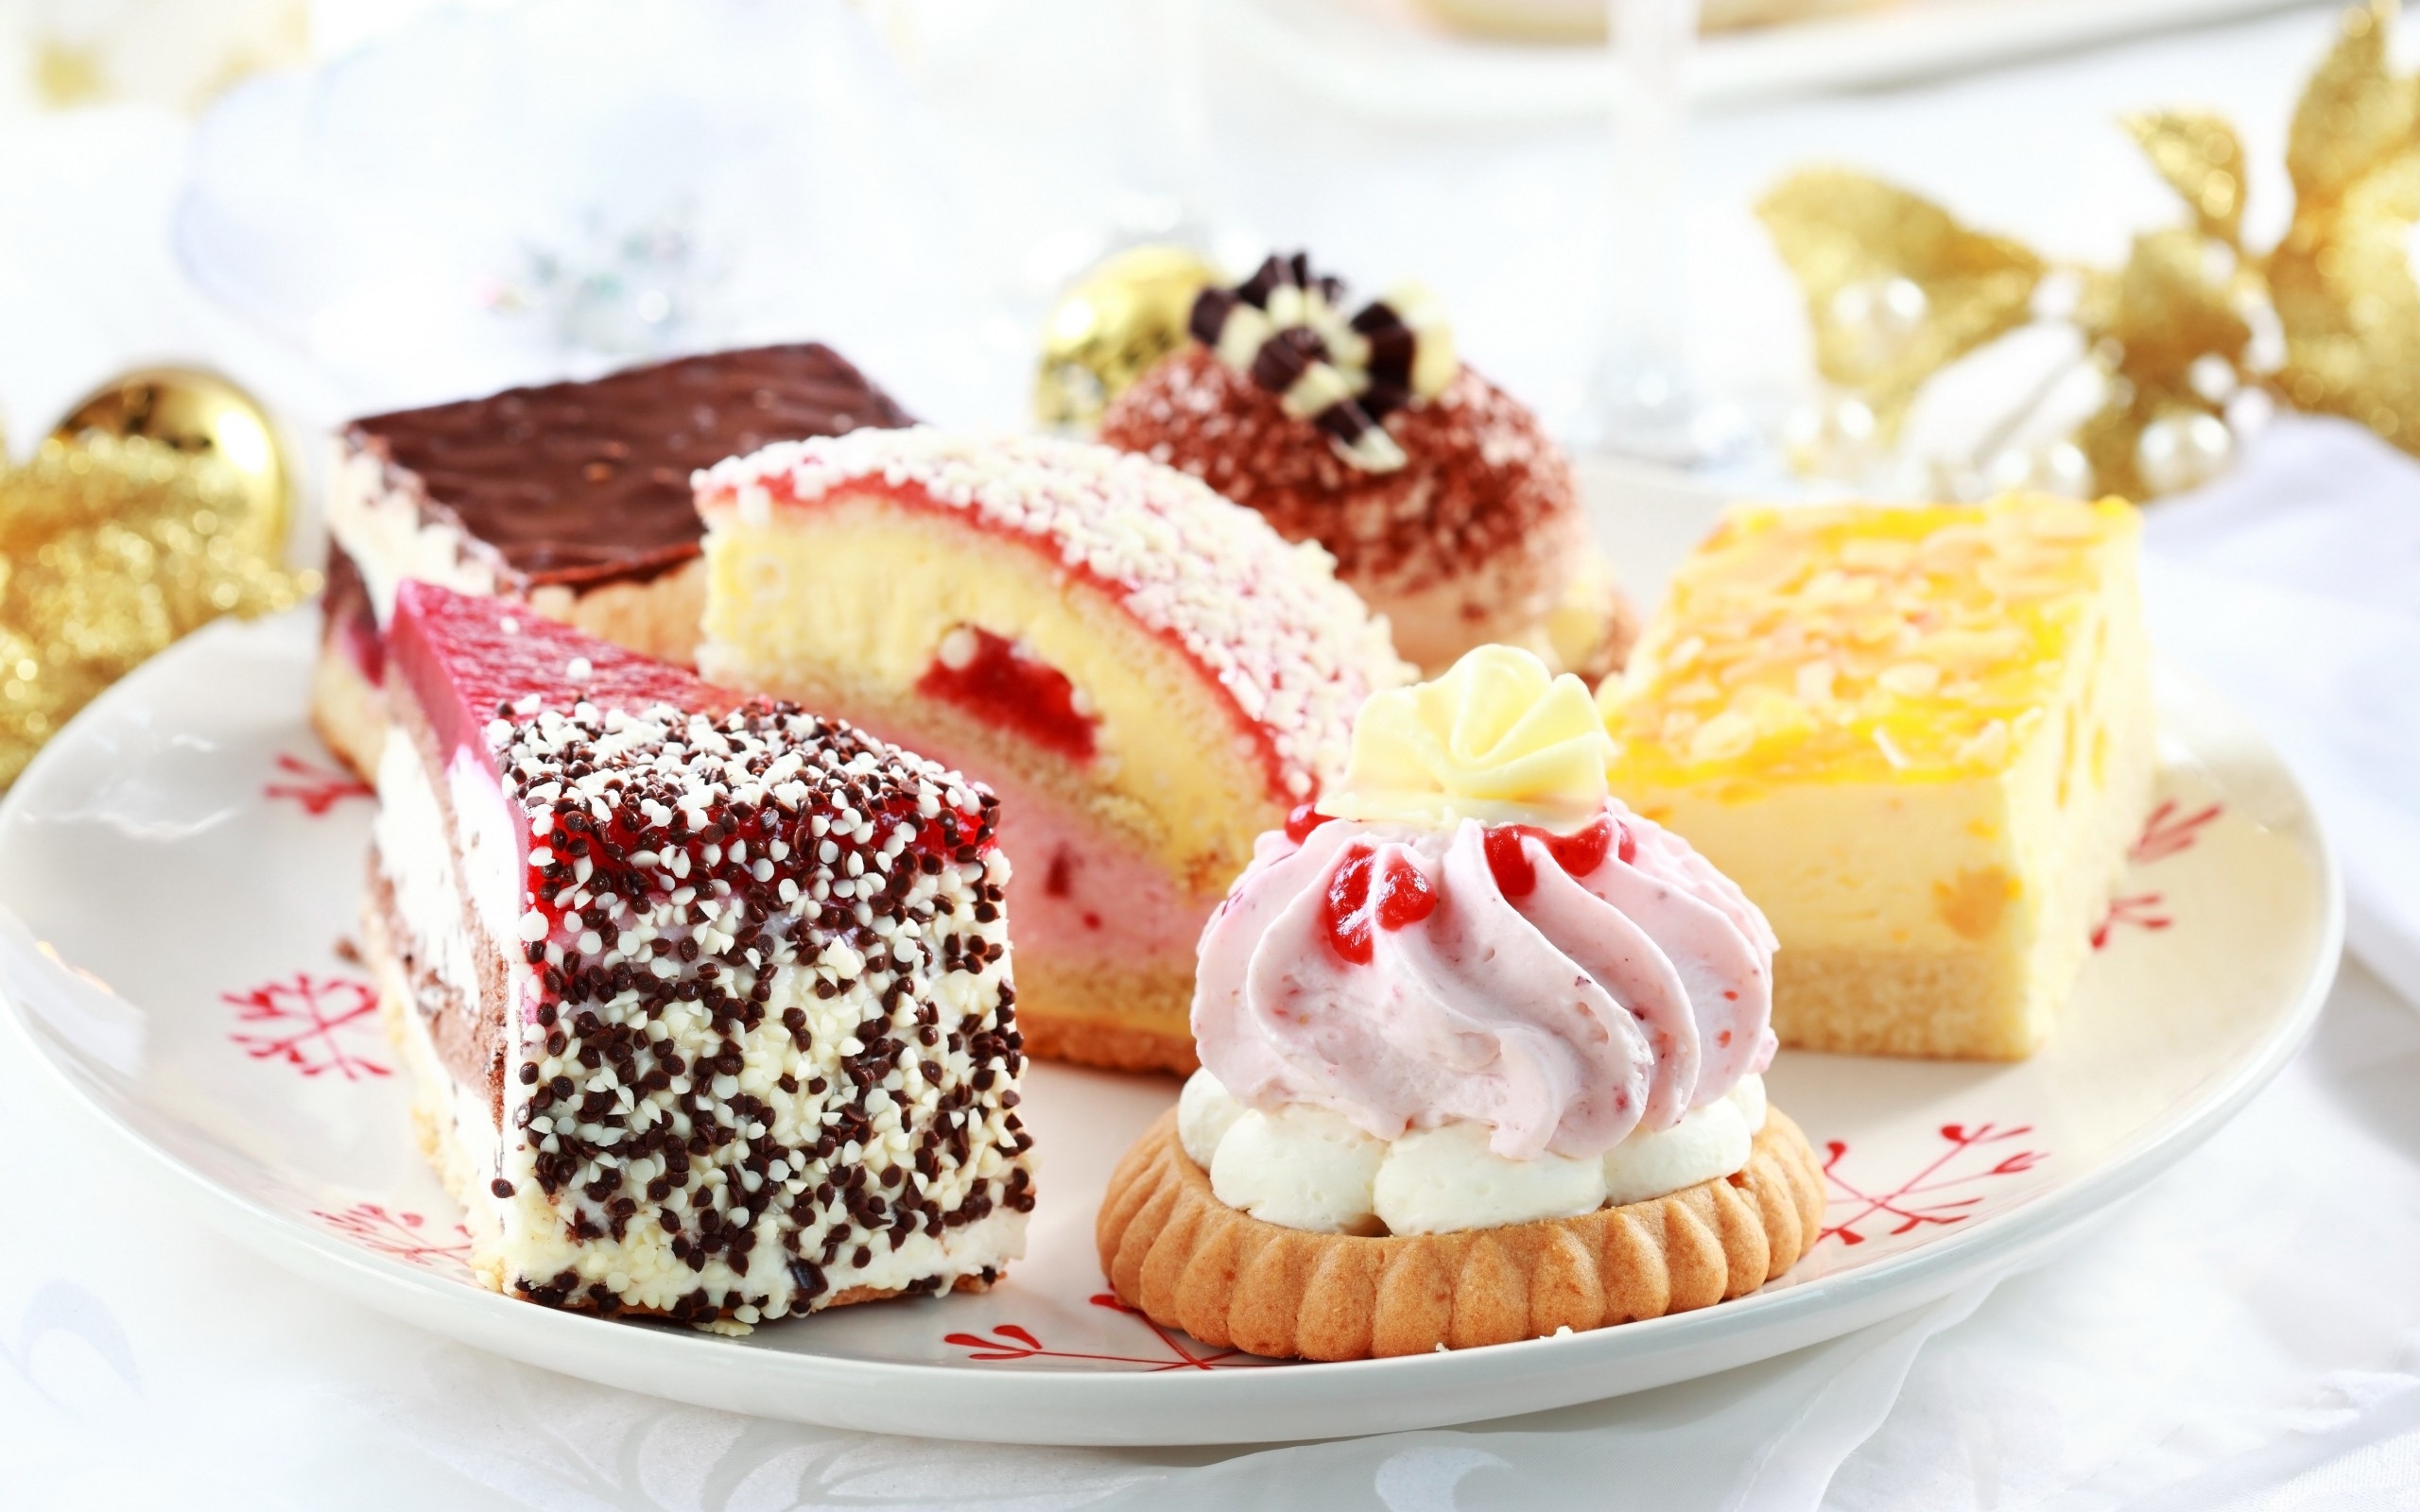 Cakes Pastries Desserts Wallpaper HD